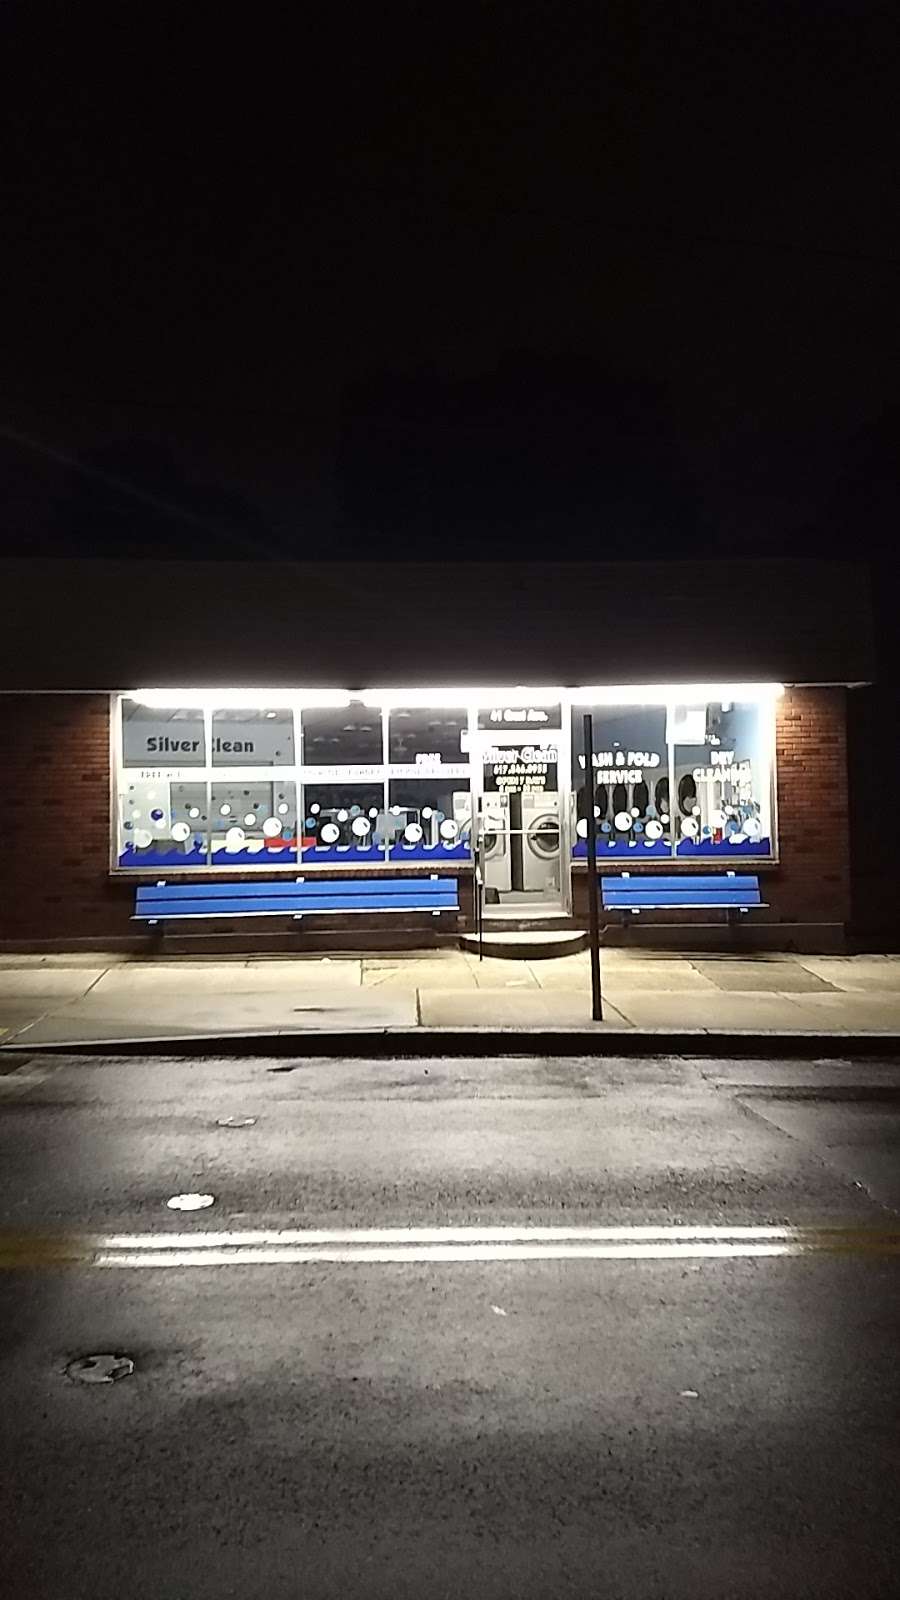 Silver Clean Laundromat - laundry  | Photo 2 of 10 | Address: 41 Crest Ave, Winthrop, MA 02152, USA | Phone: (617) 846-0955